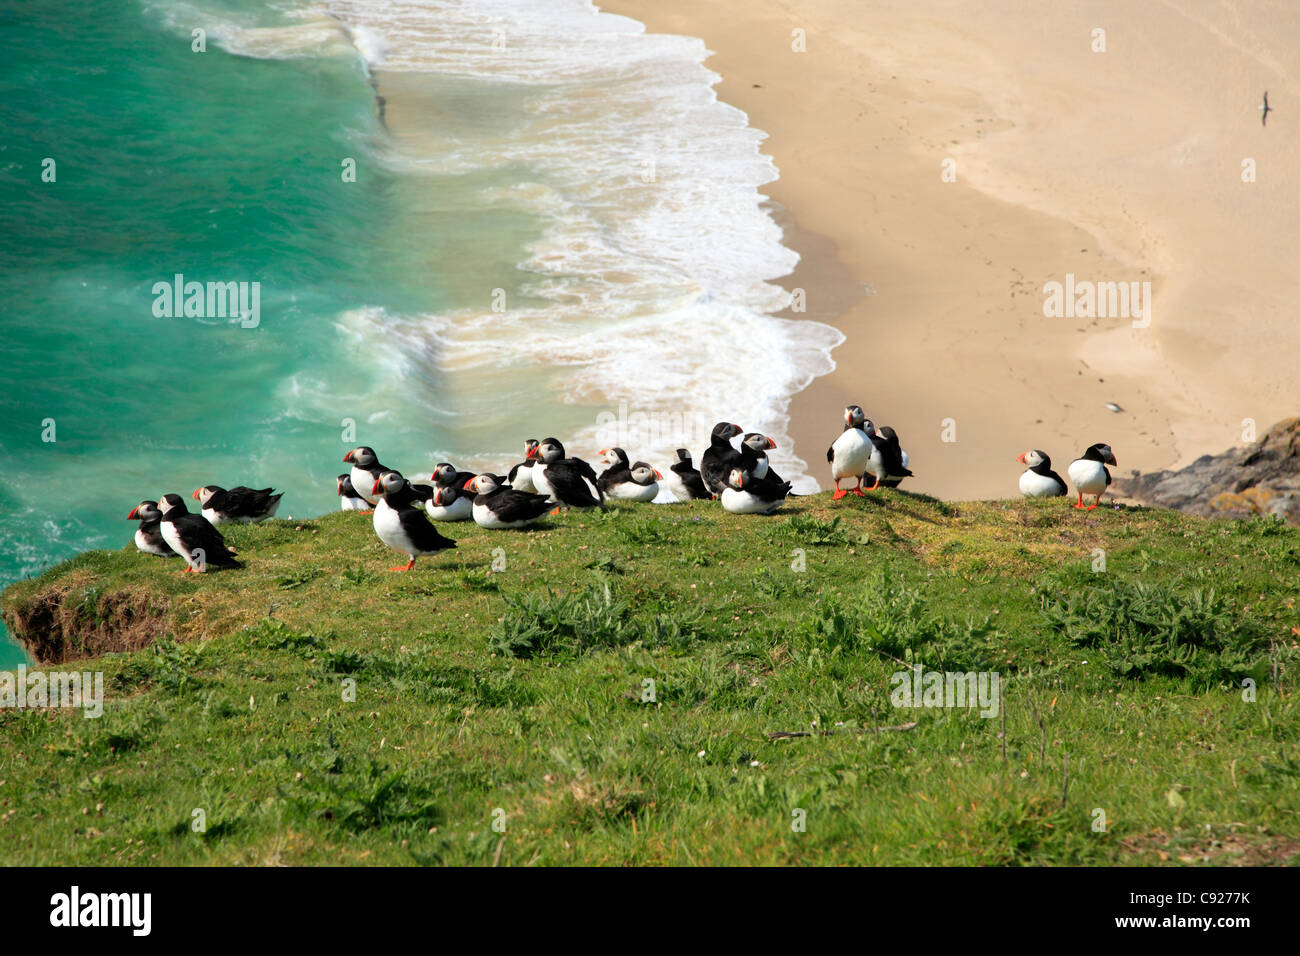 Puffins on the cliff edge overlooking sandy beach on Mingulay, one of the Bishop's Isles in the Outer Hebrides, Scotland. Stock Photo